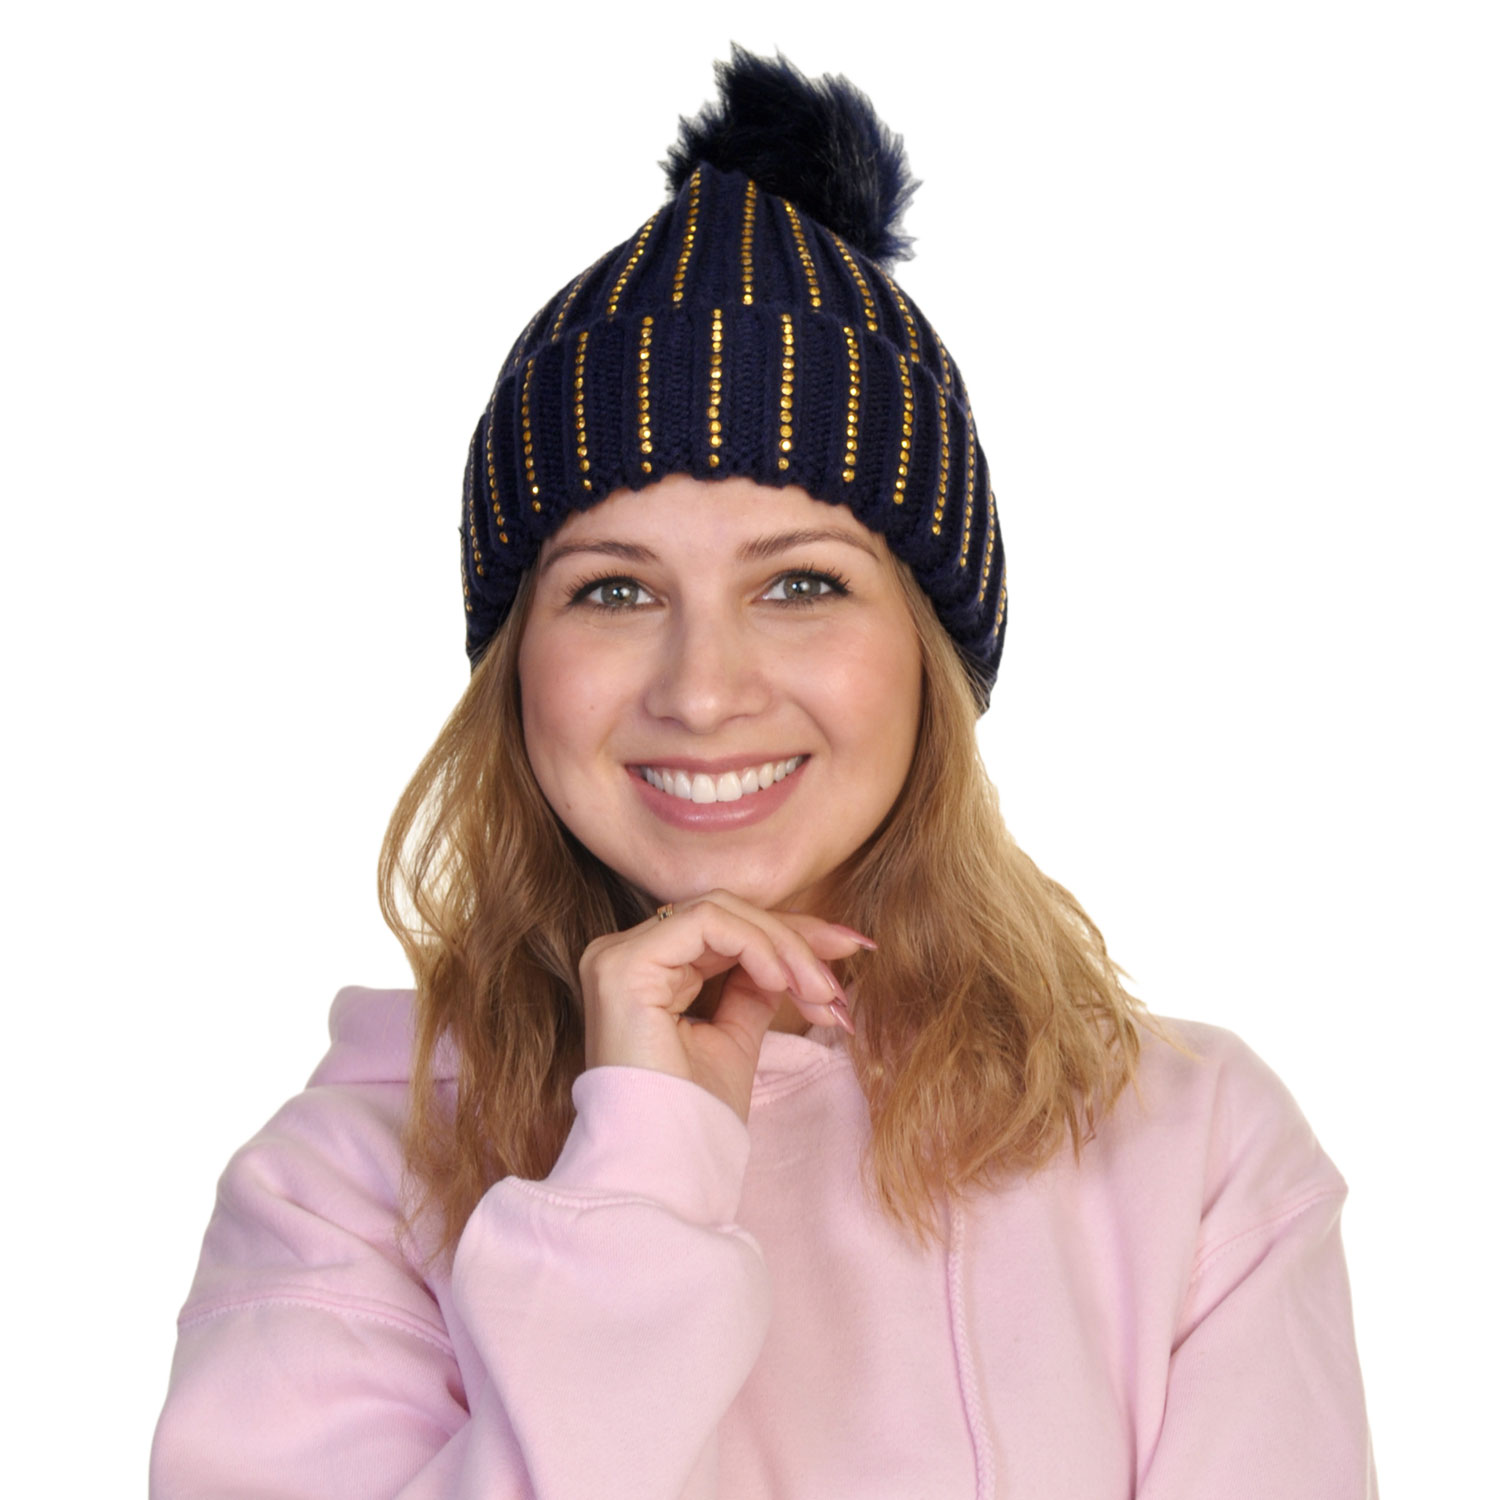 Pom-Pom Knit Beanies With Rhinestone Accent Design 2-Pack